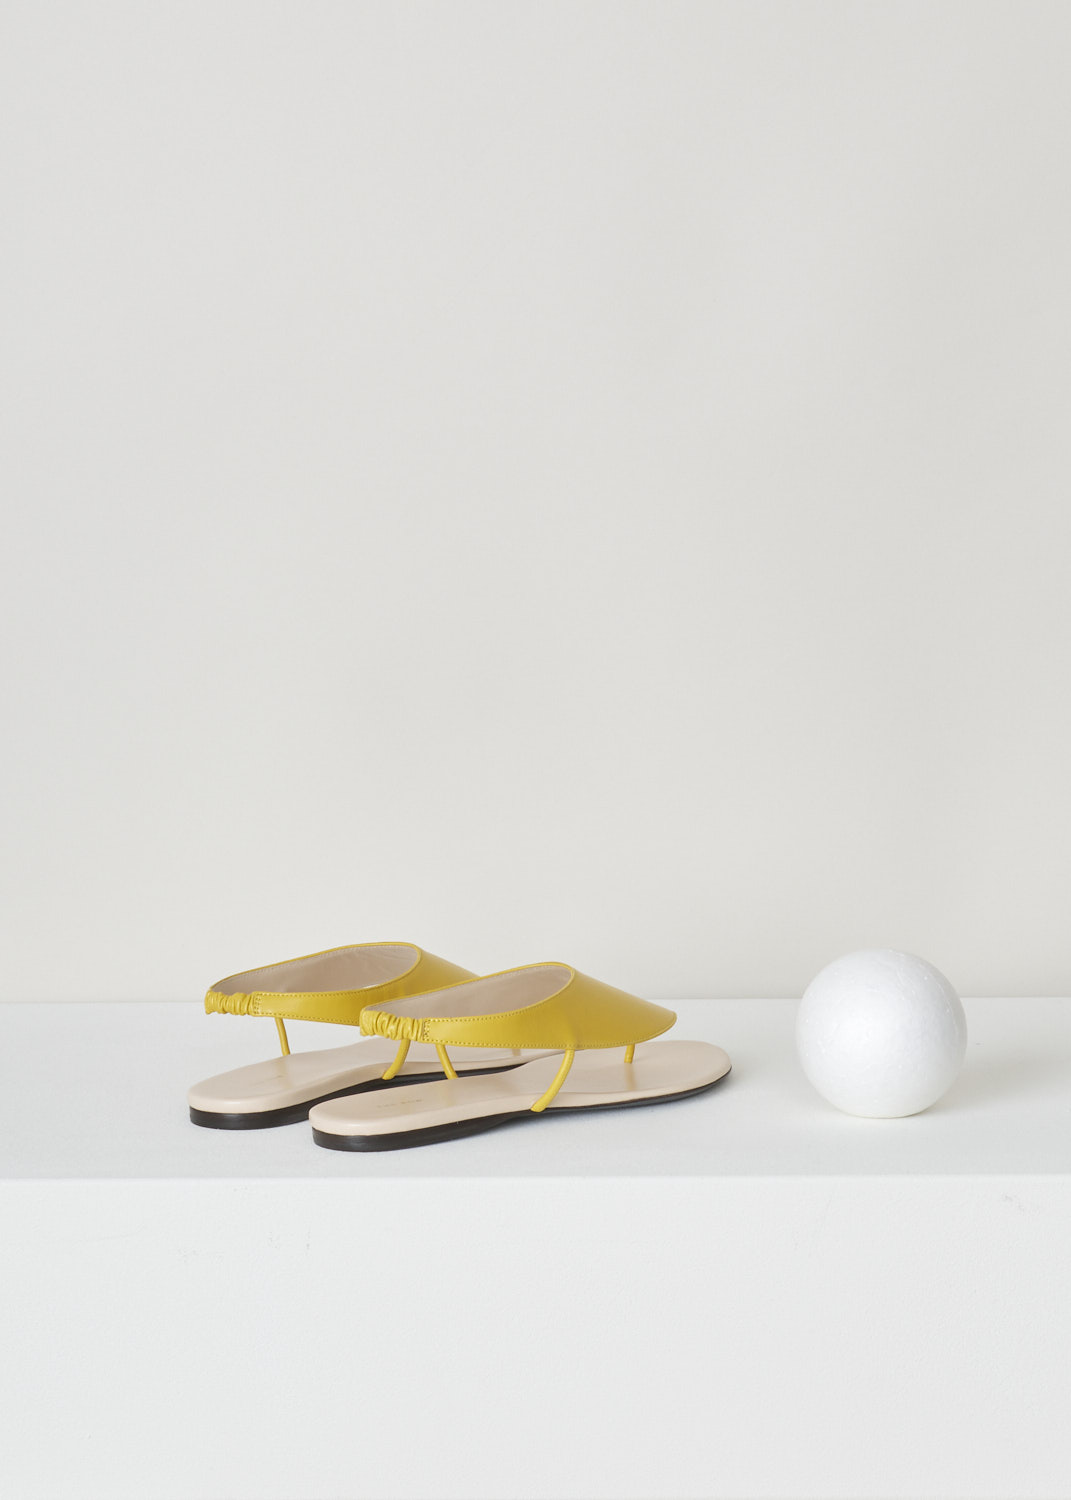 The Row, Mustard yellow ravello thong sandal, F1155_L35_MUS, yellow, back, Ravelo slip-on sandals from The Row. Coloured to the lovely shade of mustard yellow. Featuring a round and open toe vamp and comes with an elastic slingback strap. 